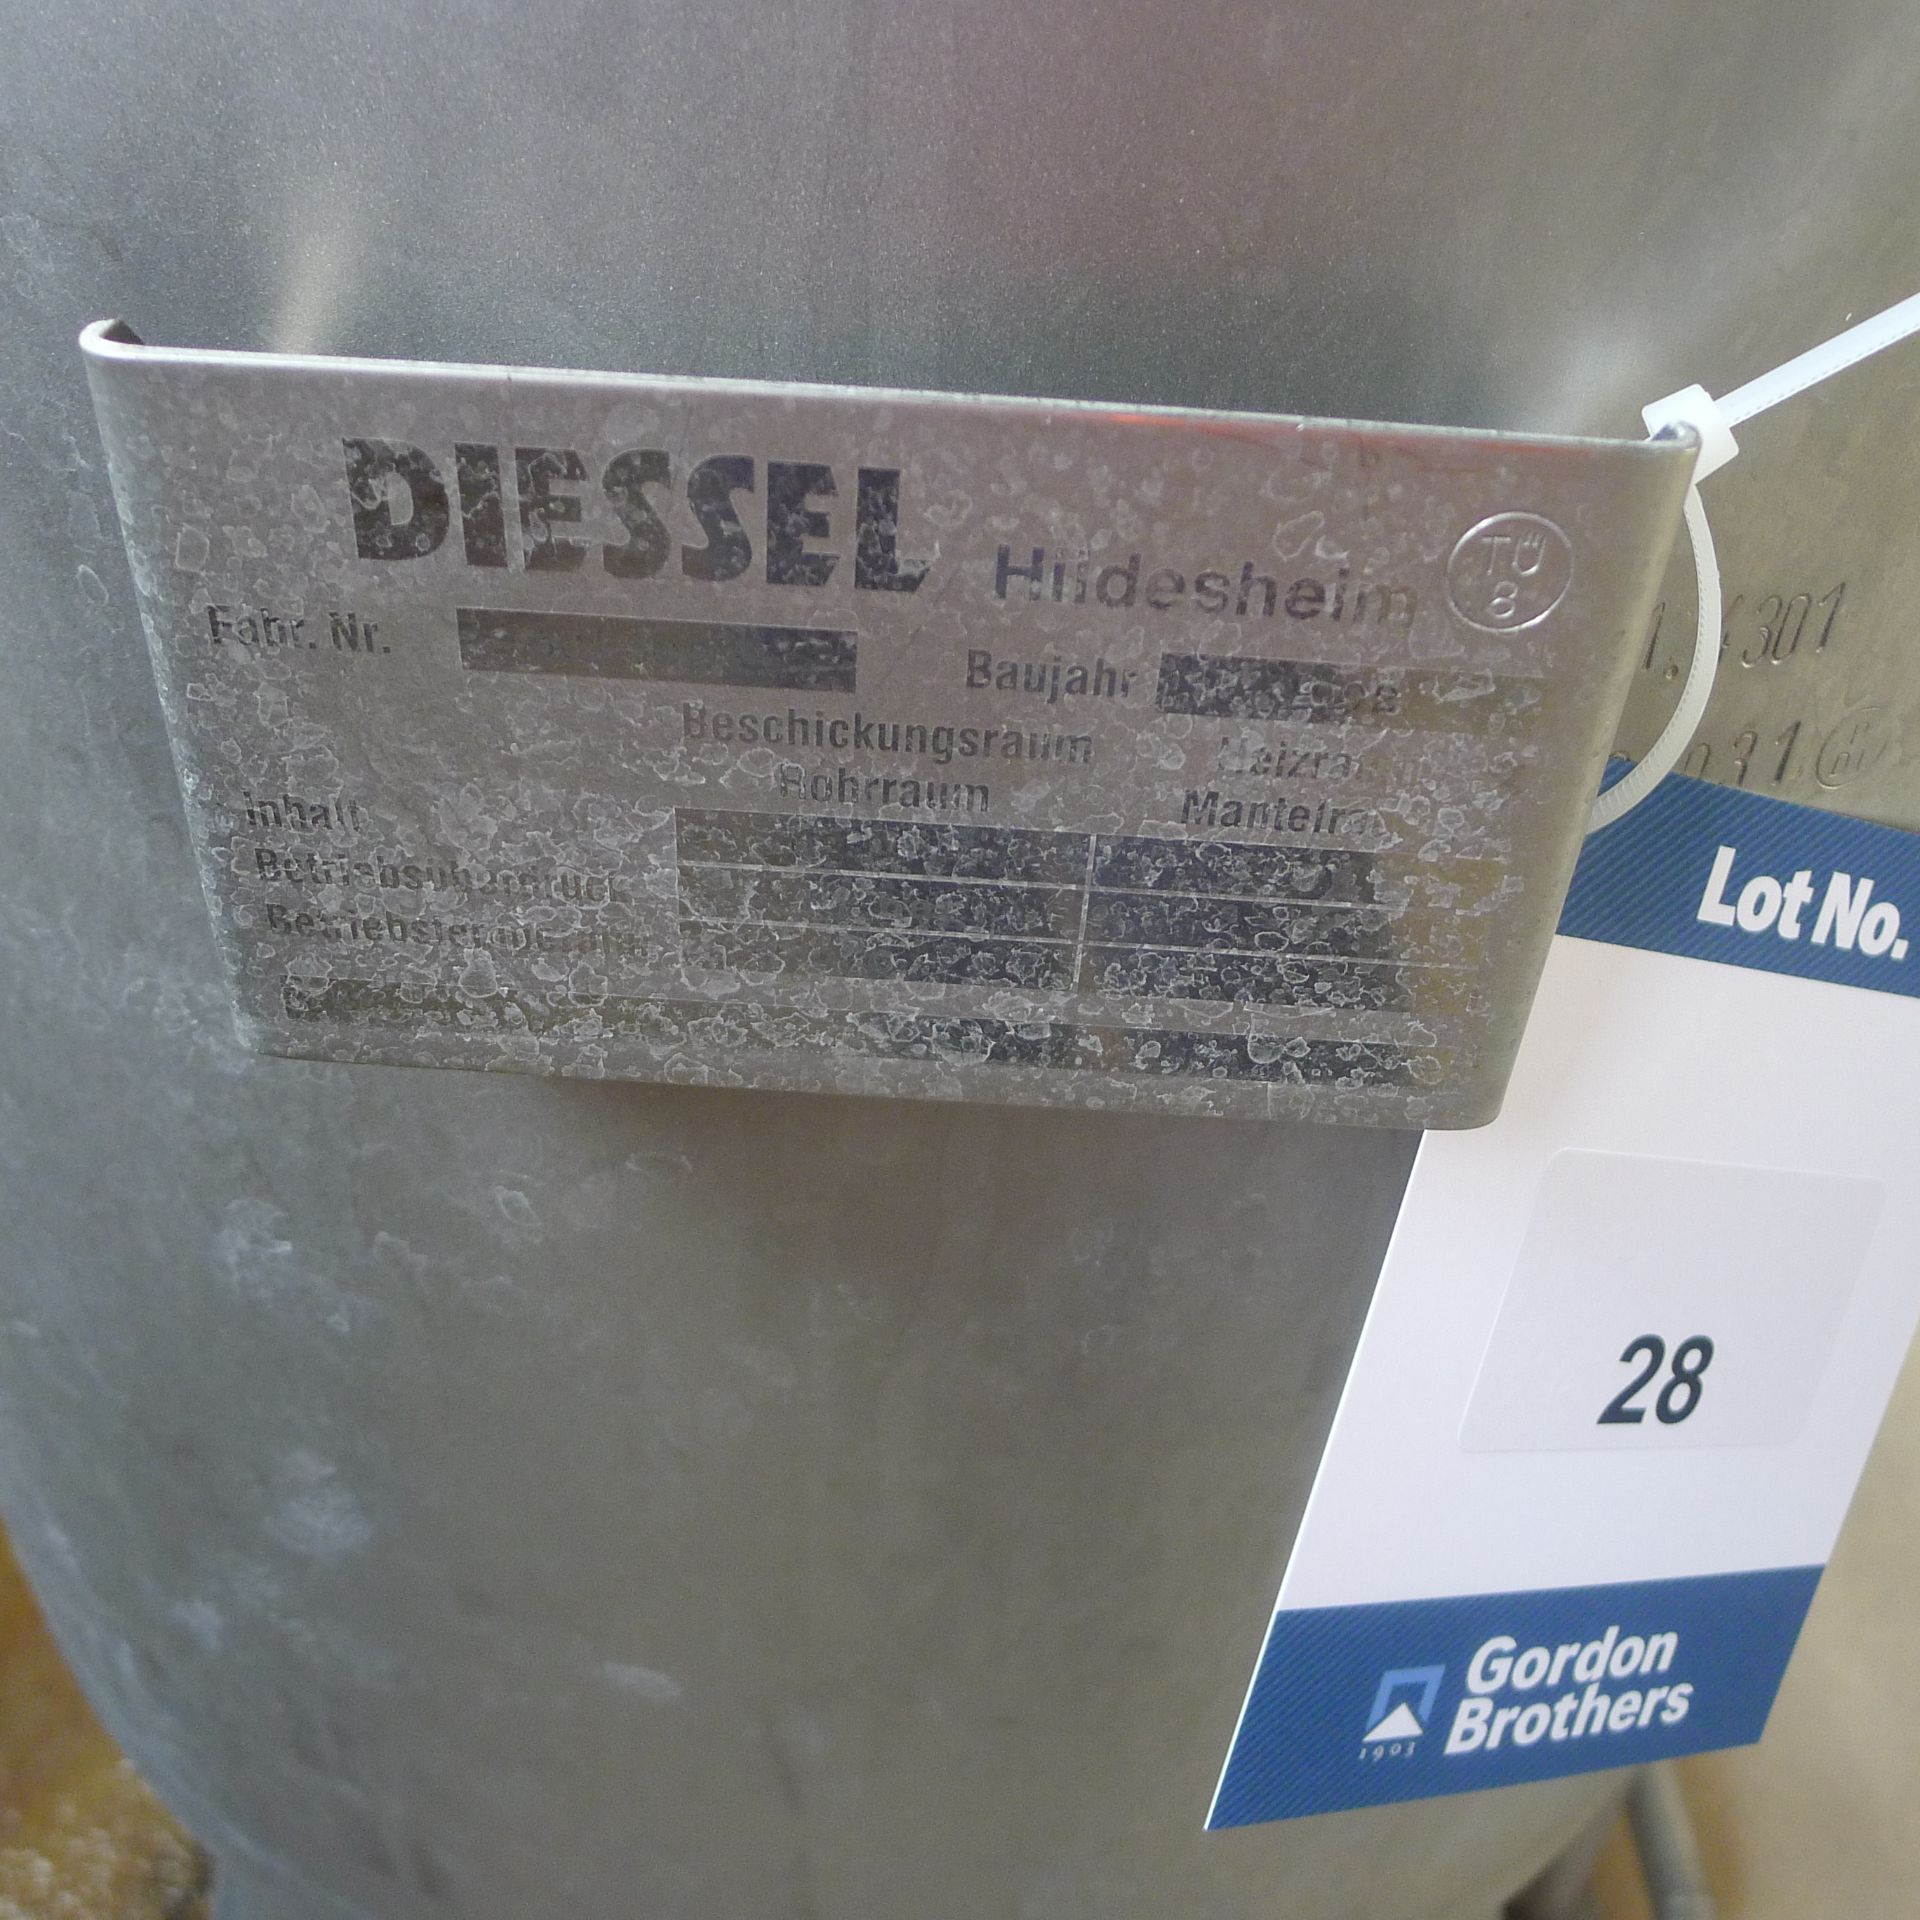 Dessel 162 liter (42.8 gallon) capacity stainless steel tank. Working pressure 10 bar (150 PSI), - Image 2 of 2